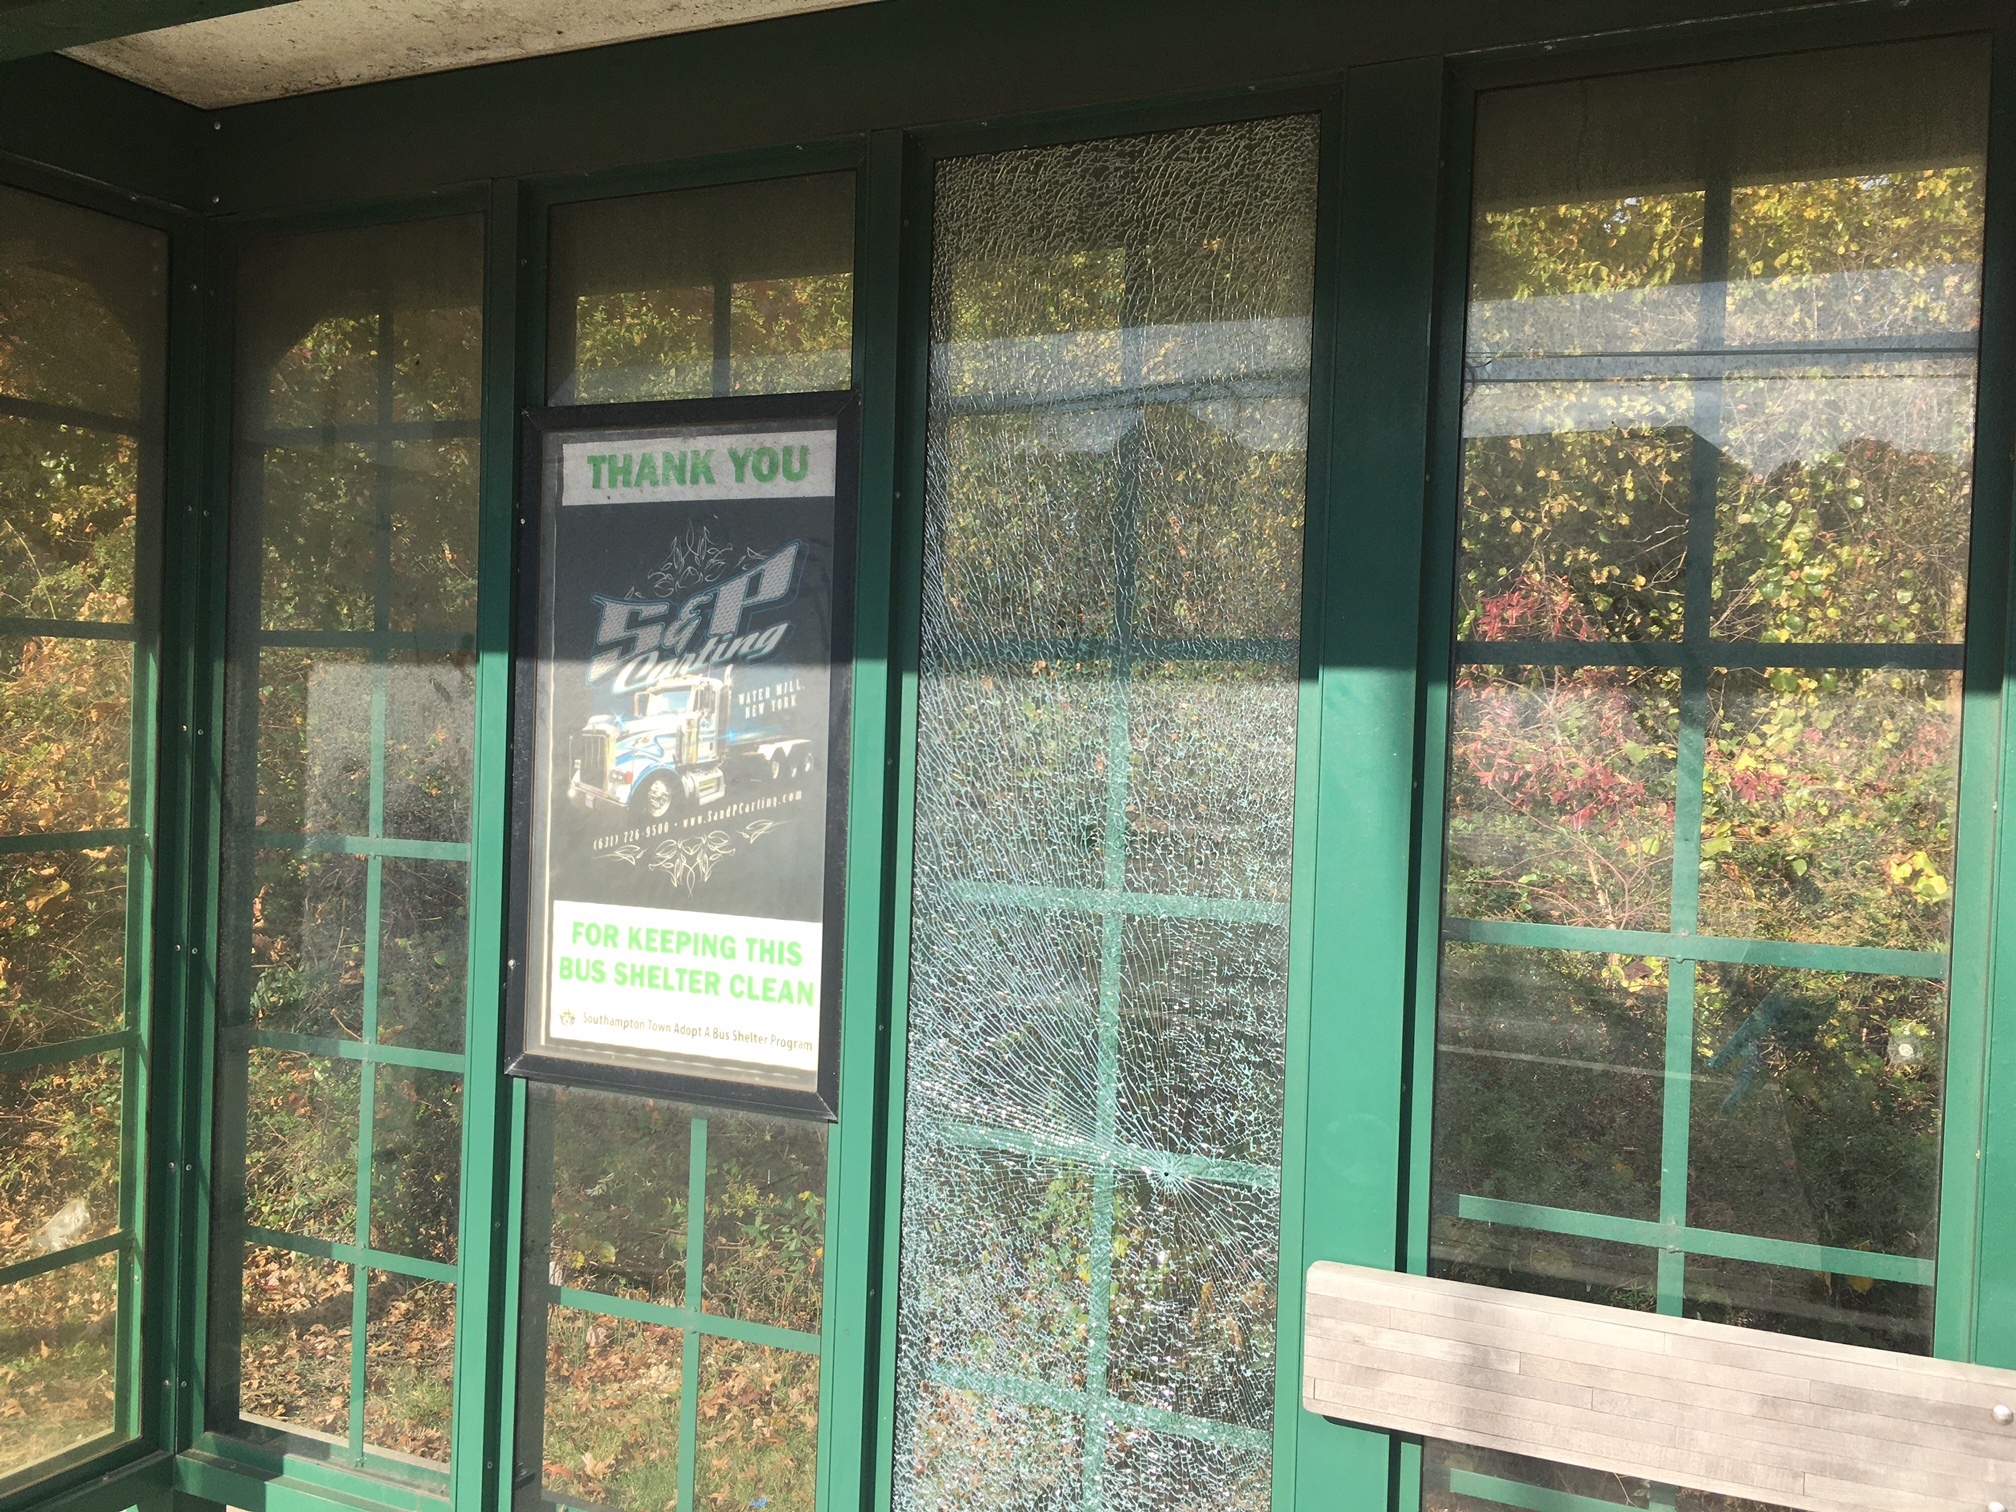 One glass panel is webbed with cracks at the bus shelter near Shrubland Road on County Road 39 in Southampton.